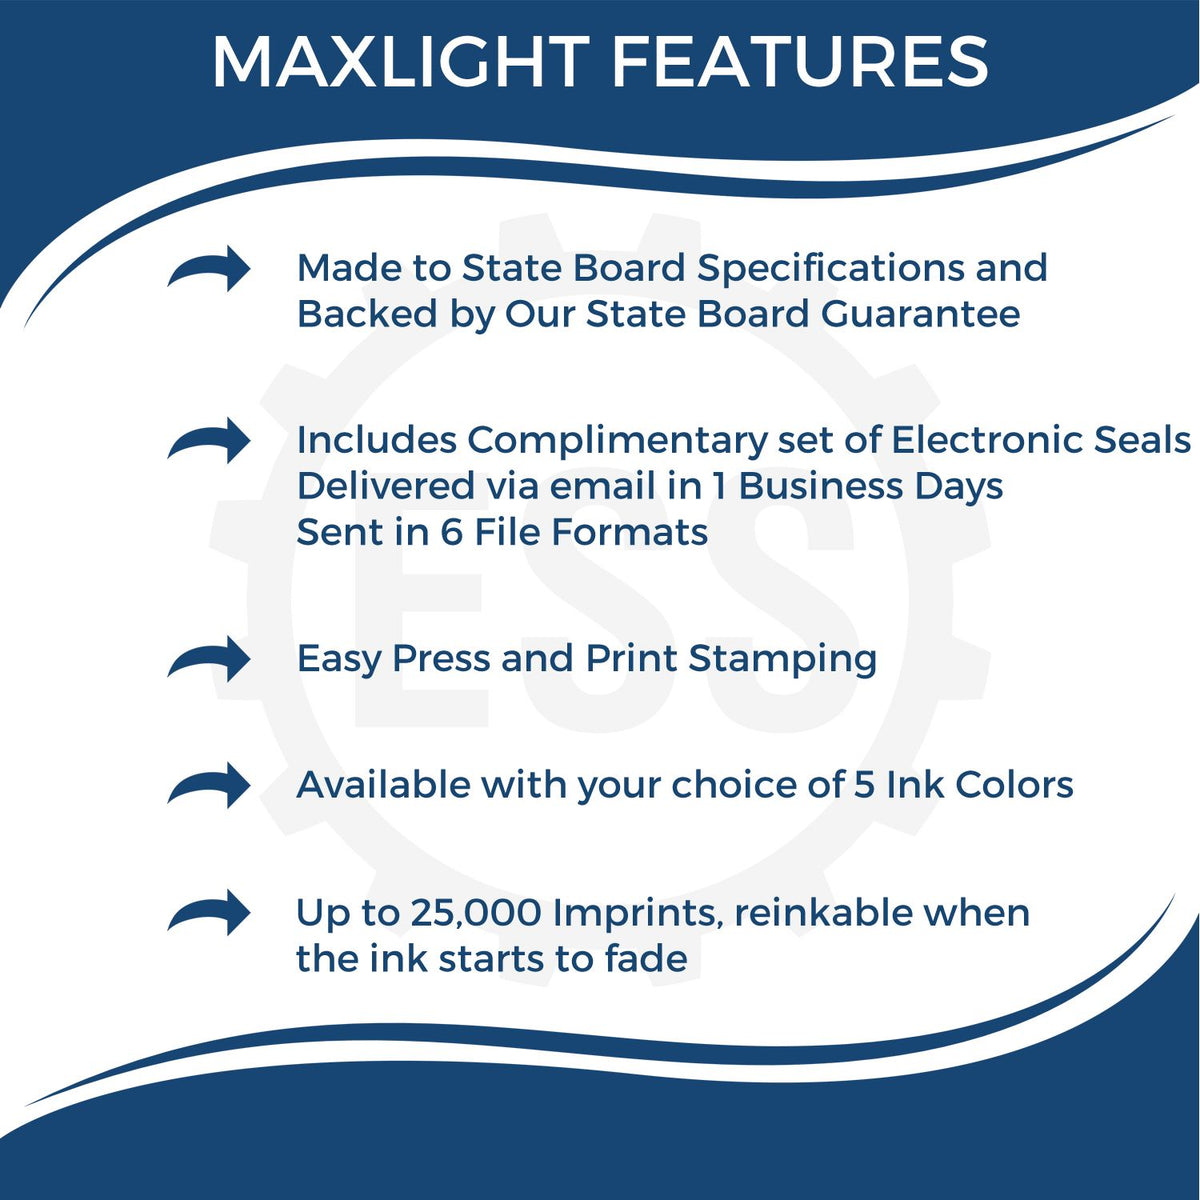 A picture of an infographic highlighting the selling points for the Premium MaxLight Pre-Inked Hawaii Geology Stamp